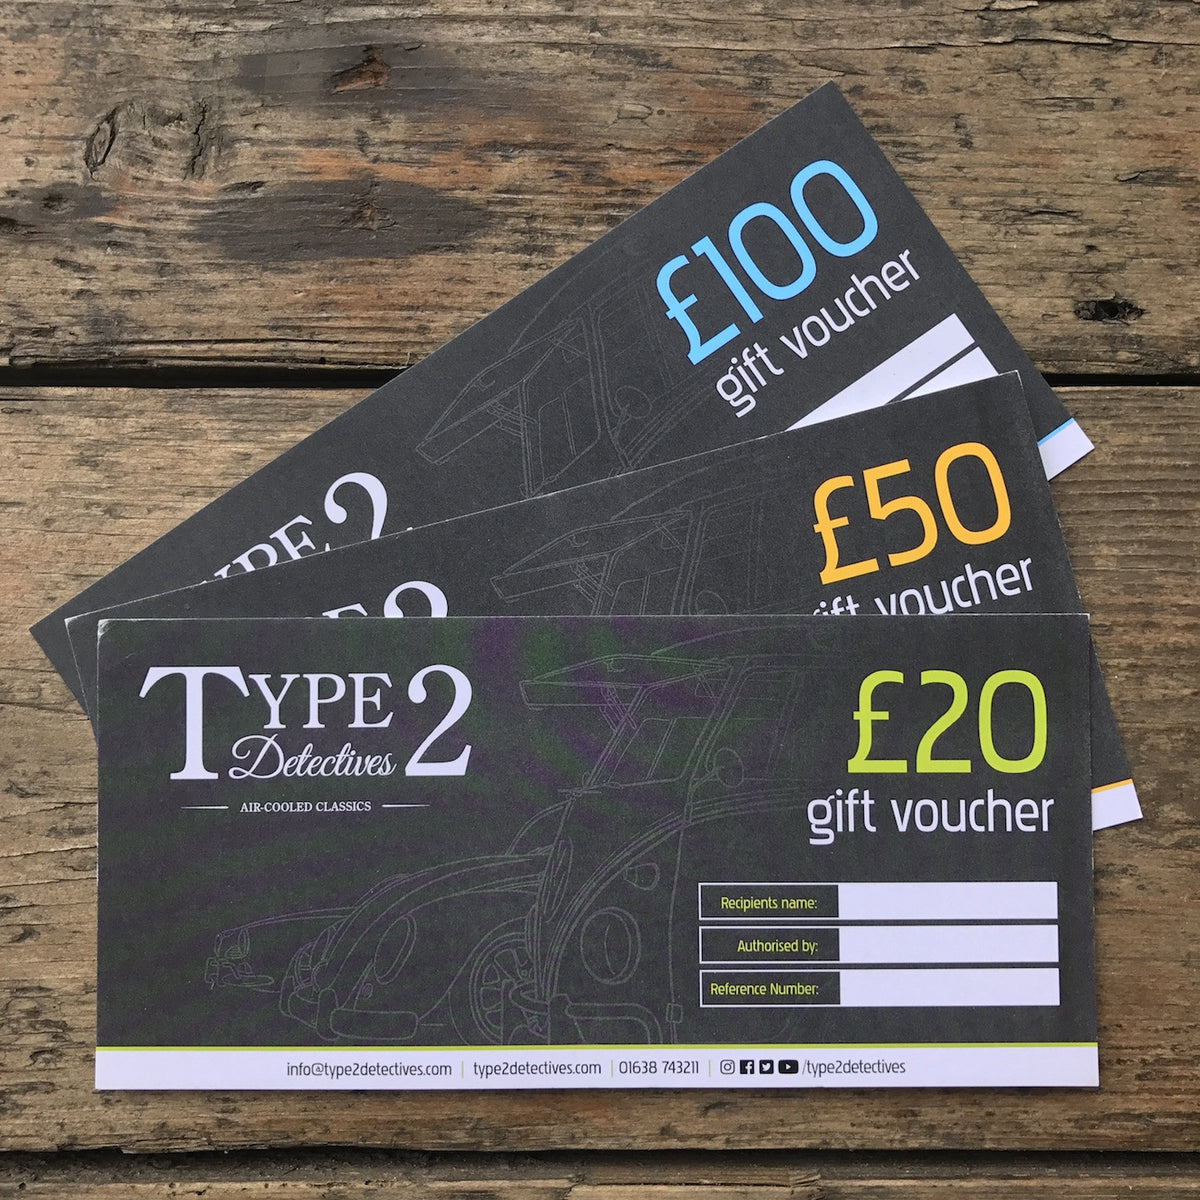 Type 2 Detectives Gift Vouchers